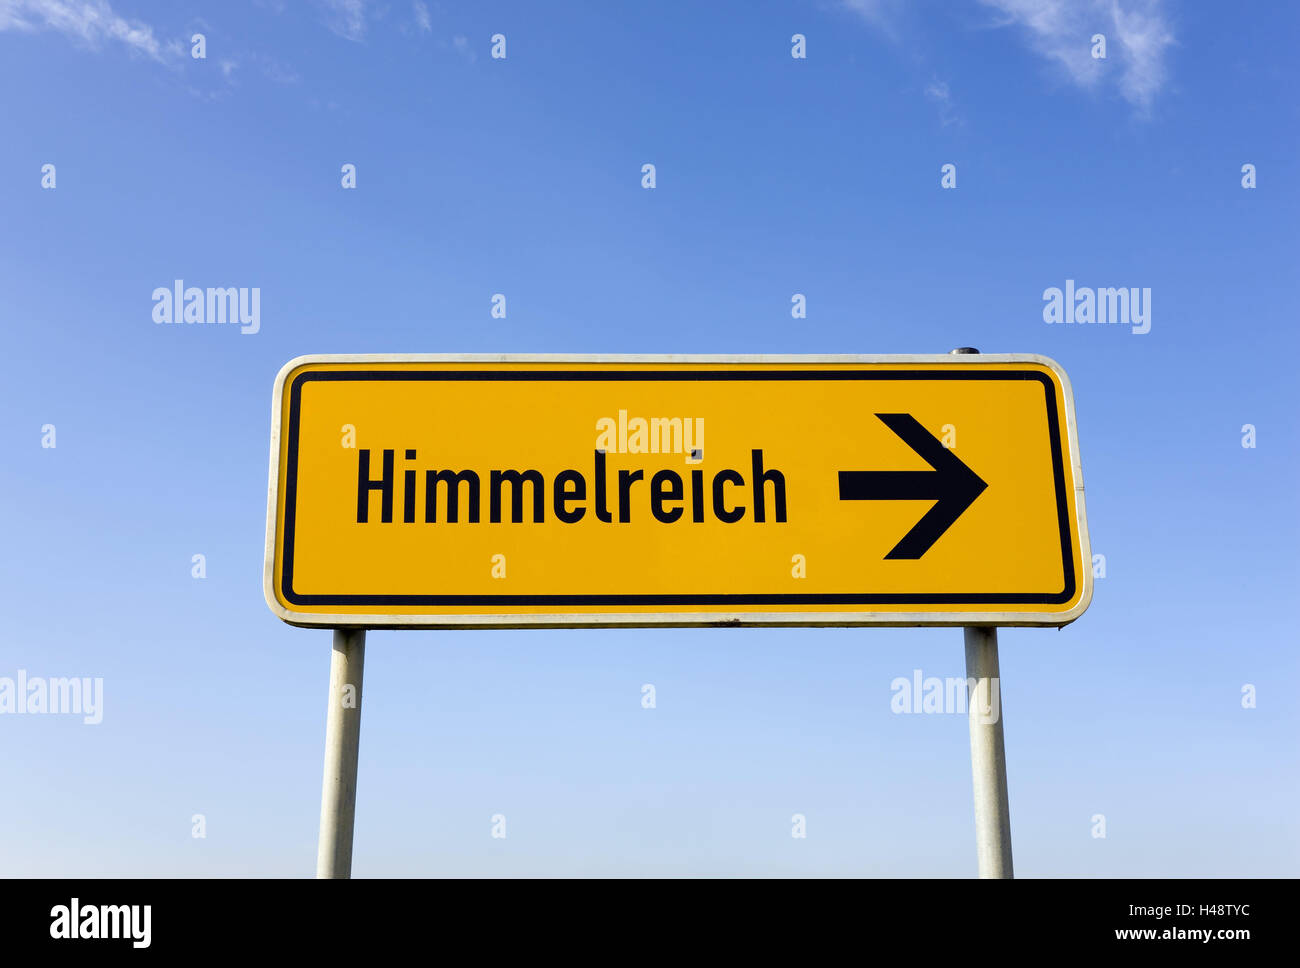 Germany, Baden-Wurttemberg, local child kingdom heaven, heaven, blue, place, local child, kingdom heaven, signpost, sign, tip, sign, yellow, arrow, direction, on the right, direction wise man, icon, conception, faith, religion, Christianity, Stock Photo